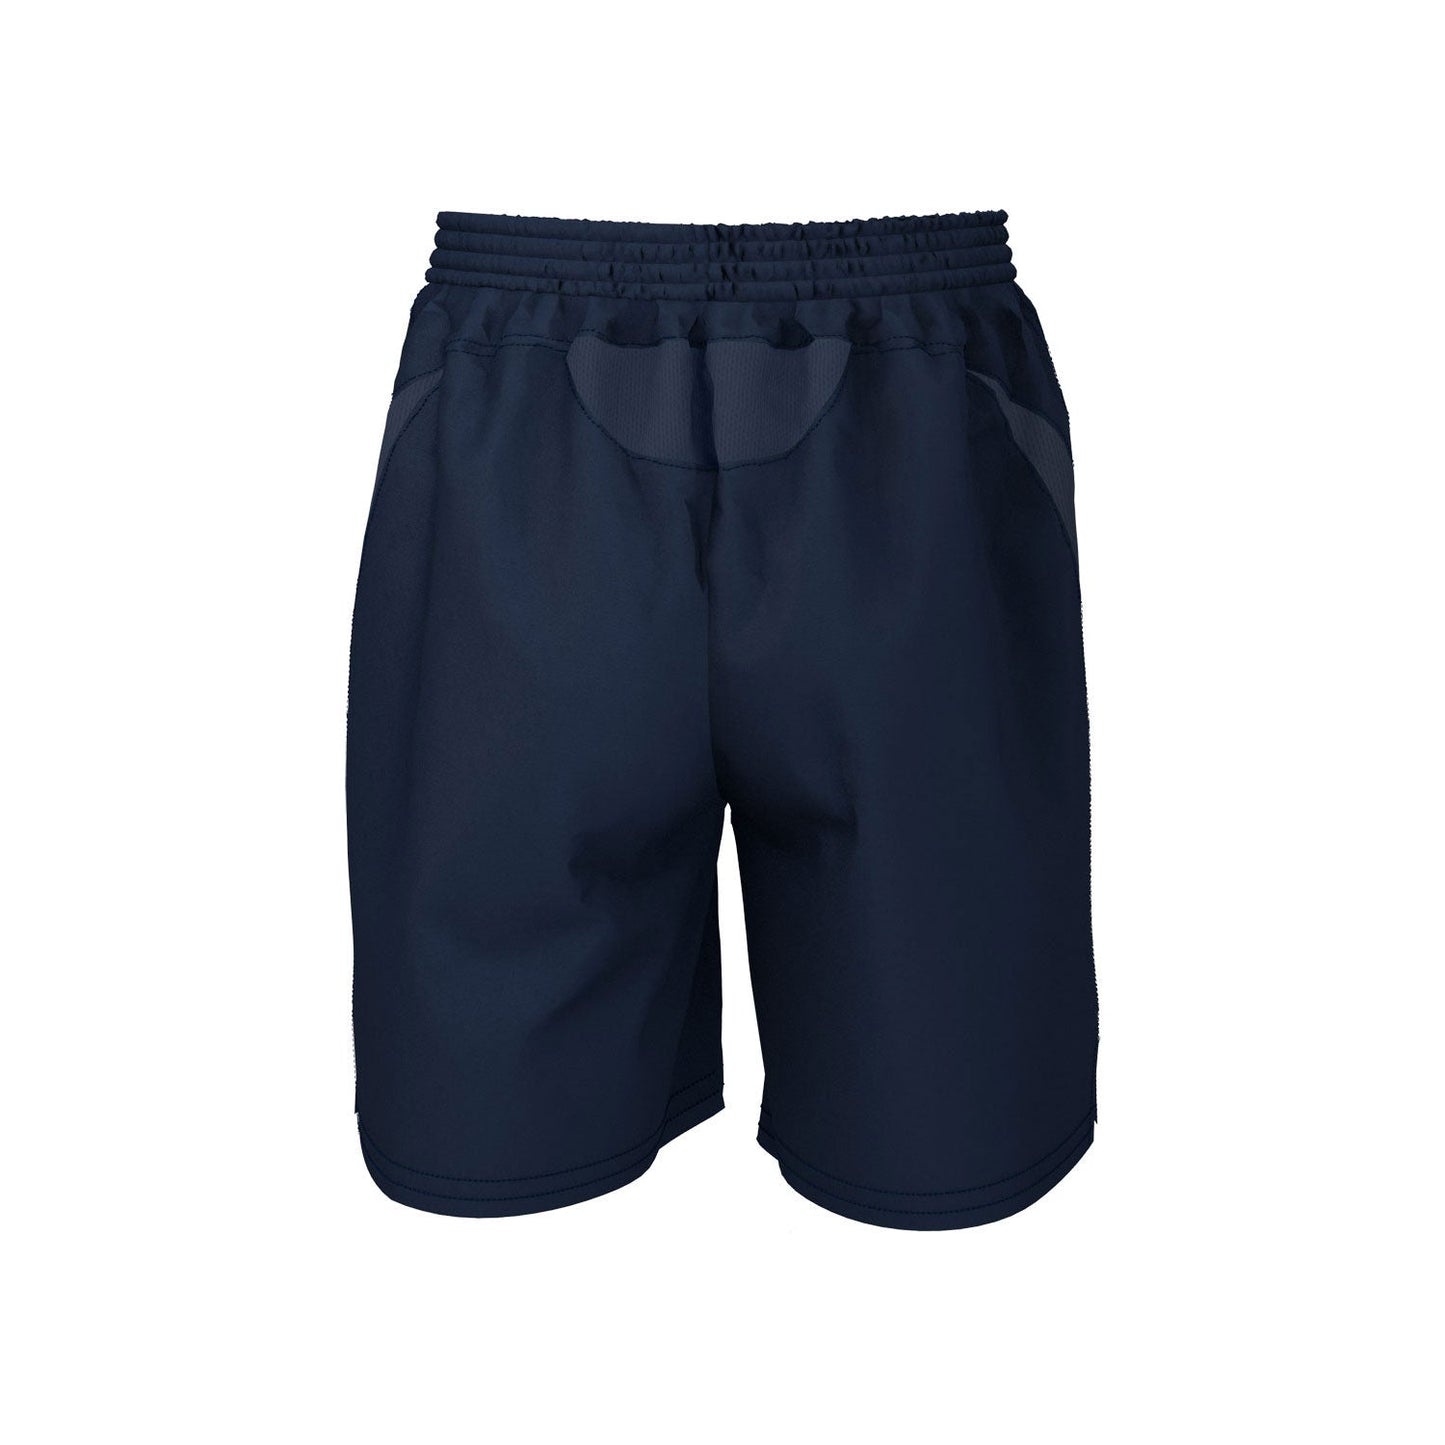 Eastbourne RC Training Shorts